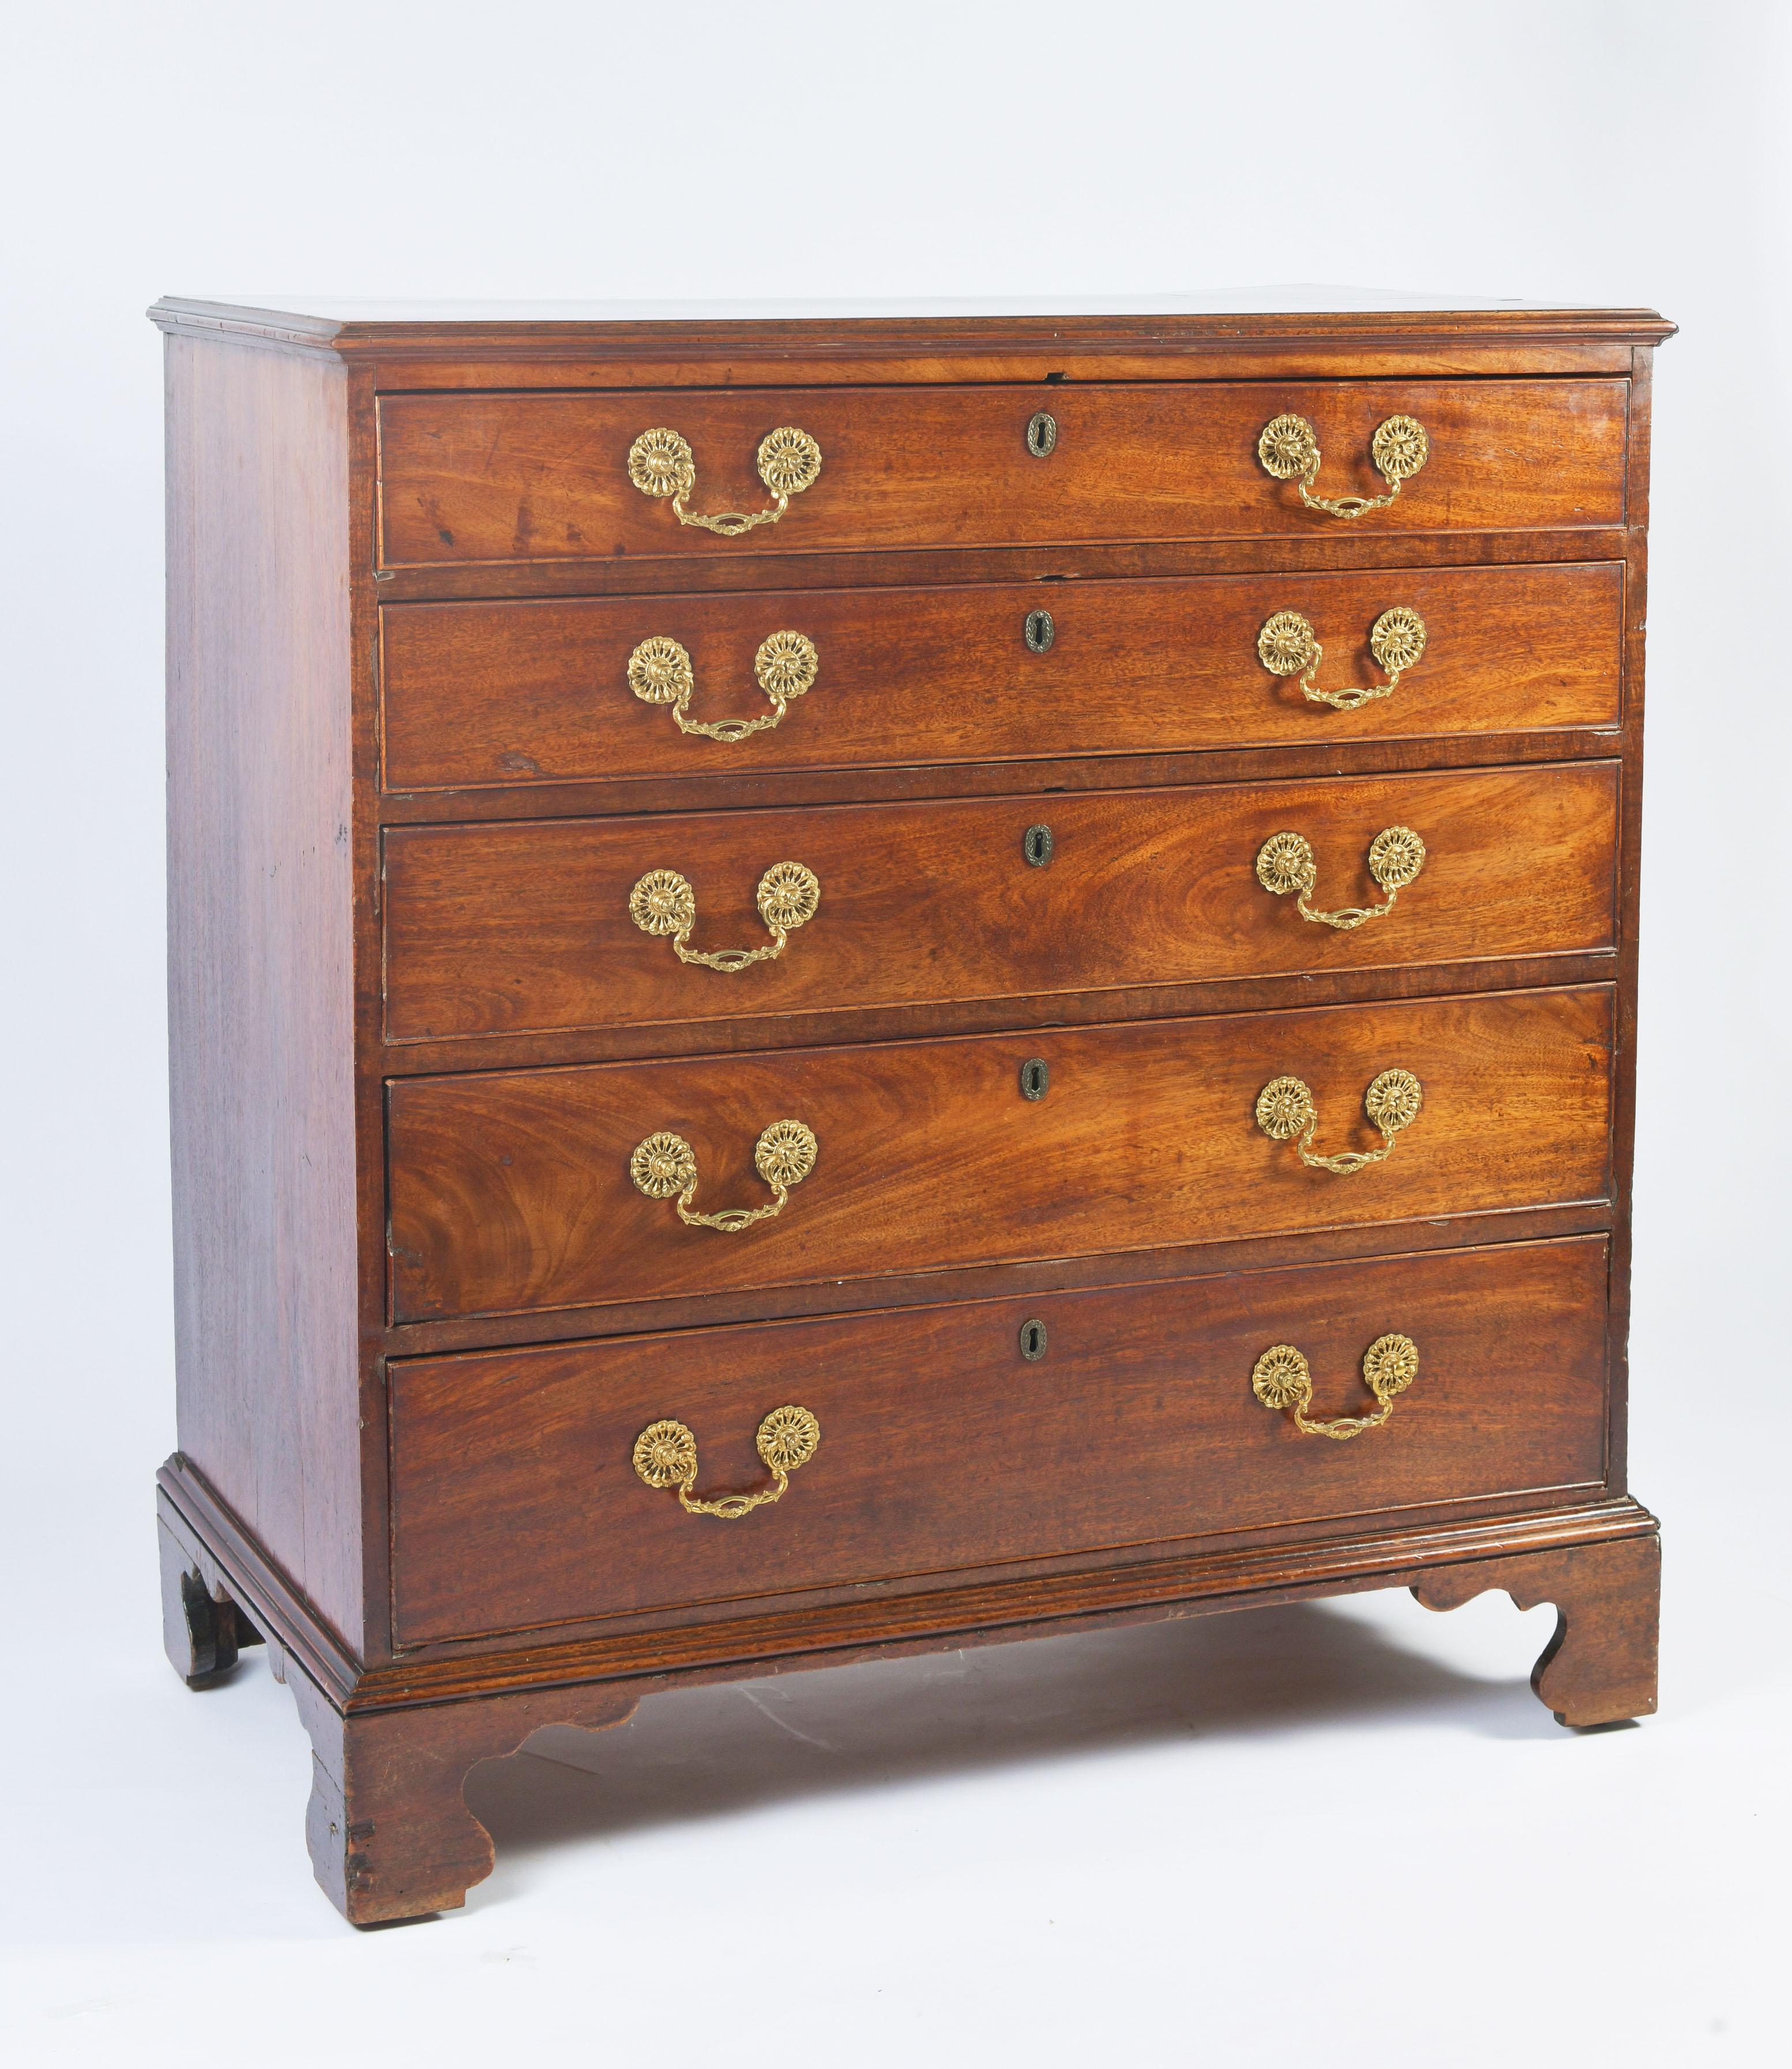 Regency Early 19th Century Mahogany Chest of Drawers